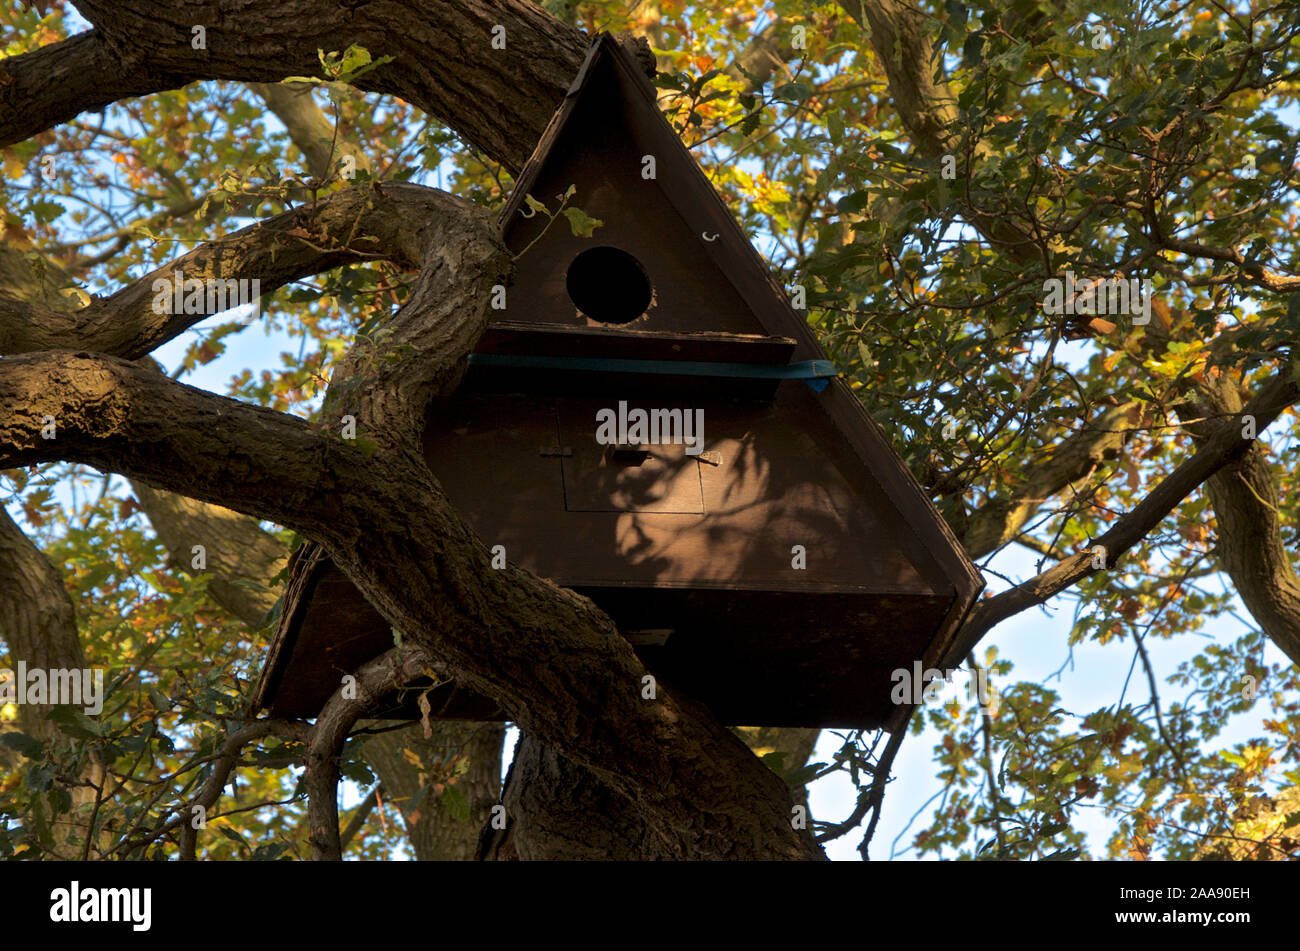 A triangular shaped Owl box in a tree purpose built to encourage owl nesting. Stock Photo